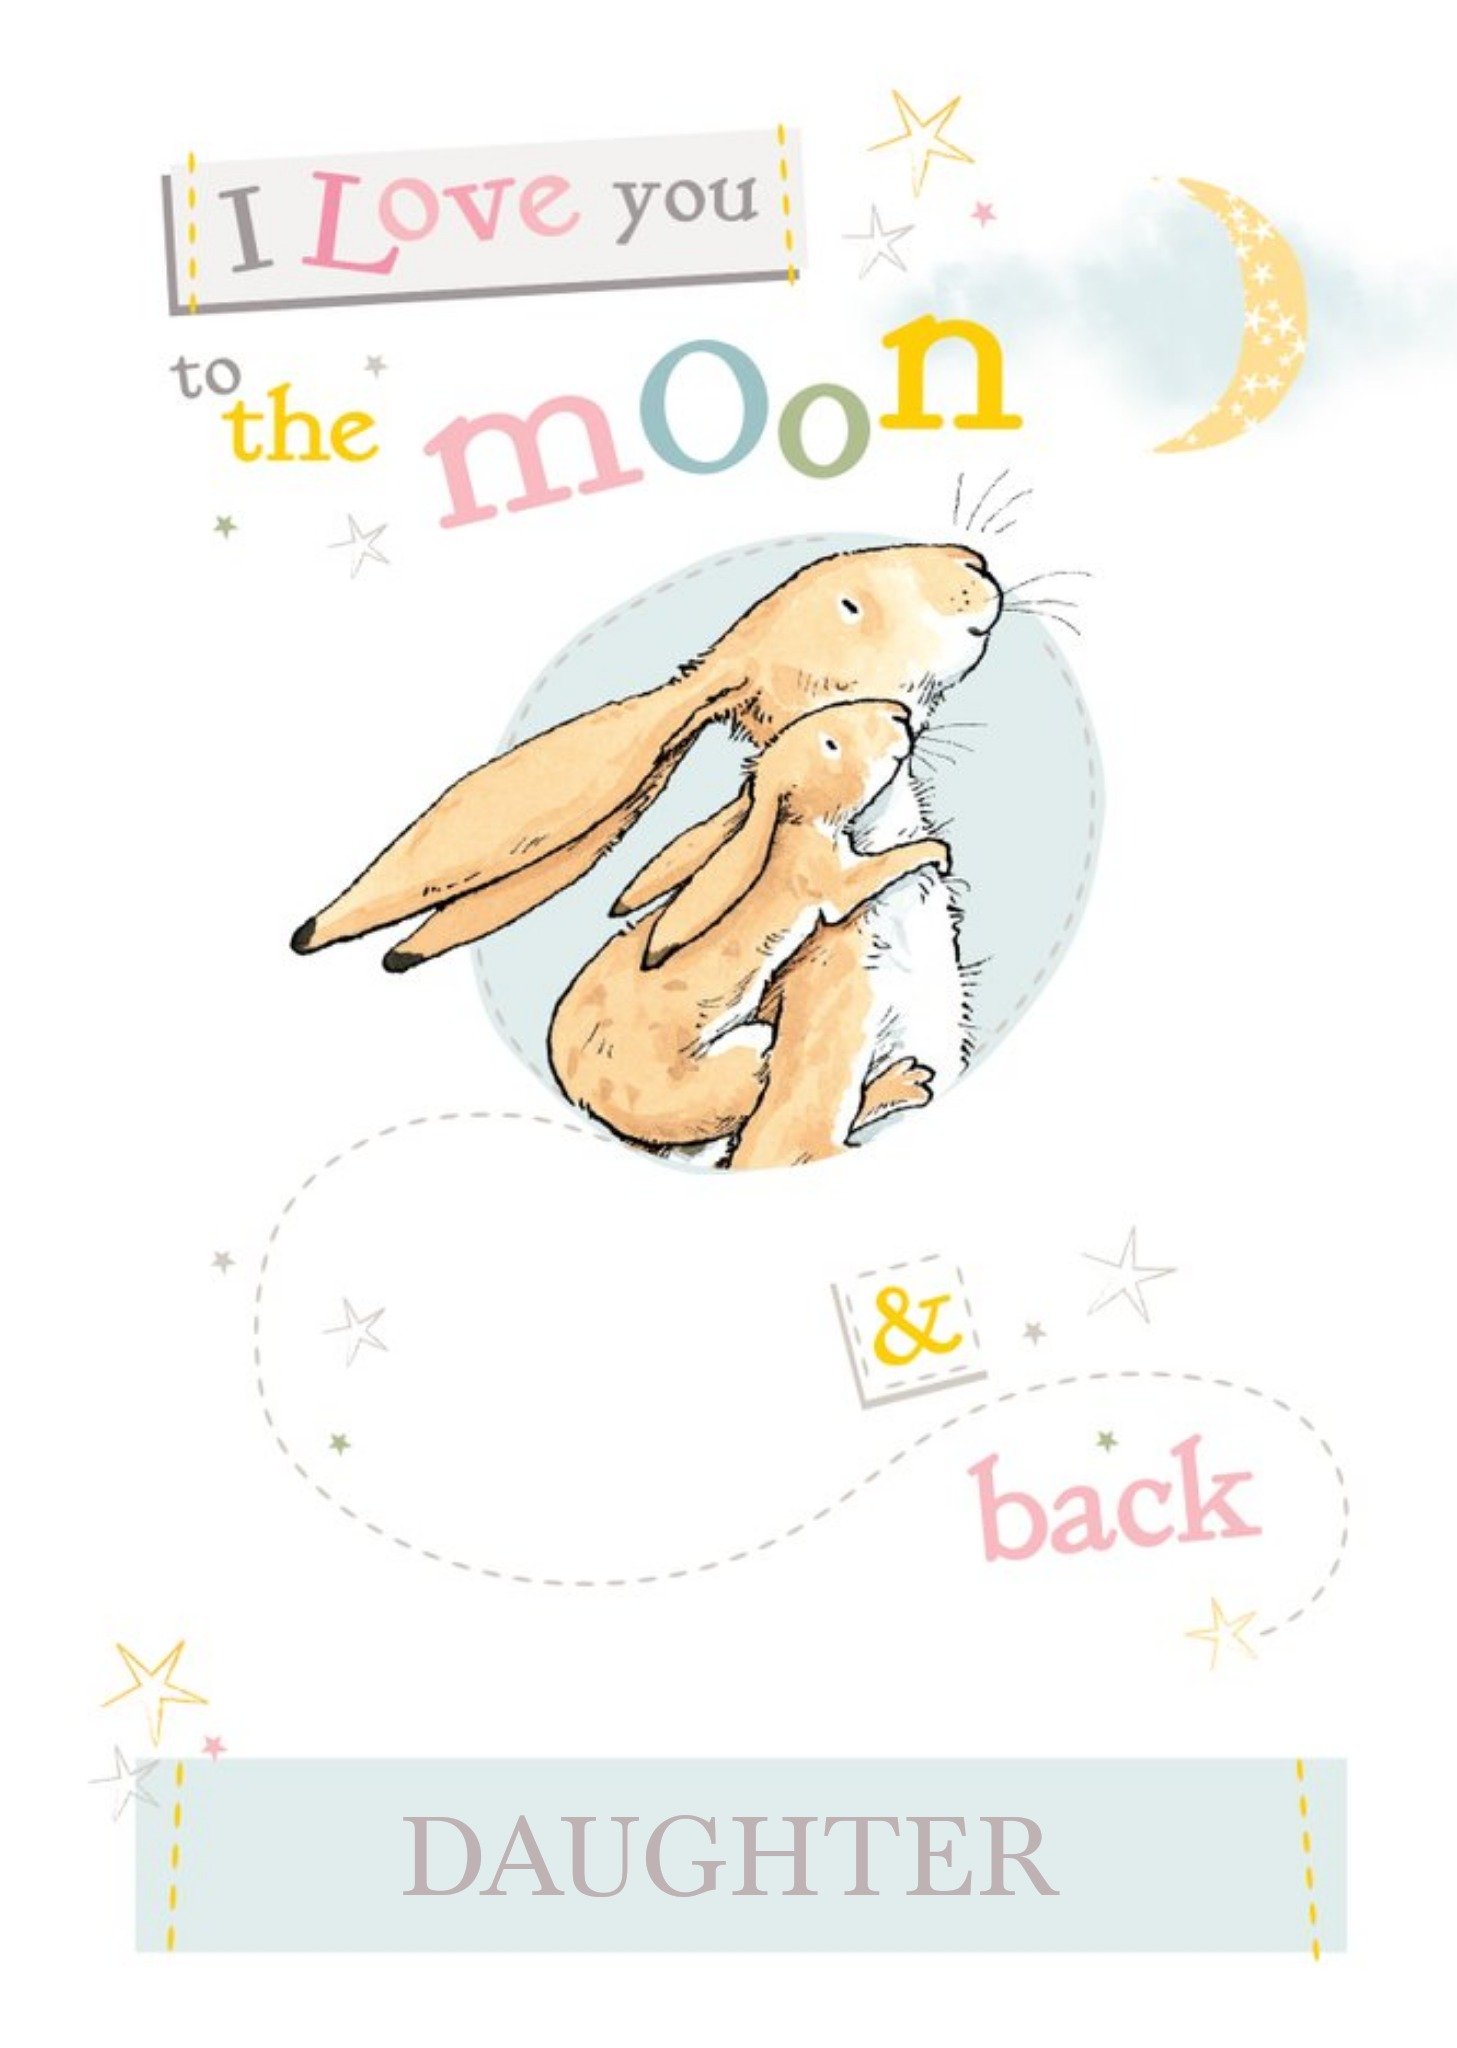 Peter Rabbit Danilo Ghmily Love You To The Moon And Back Daughter Card, Large